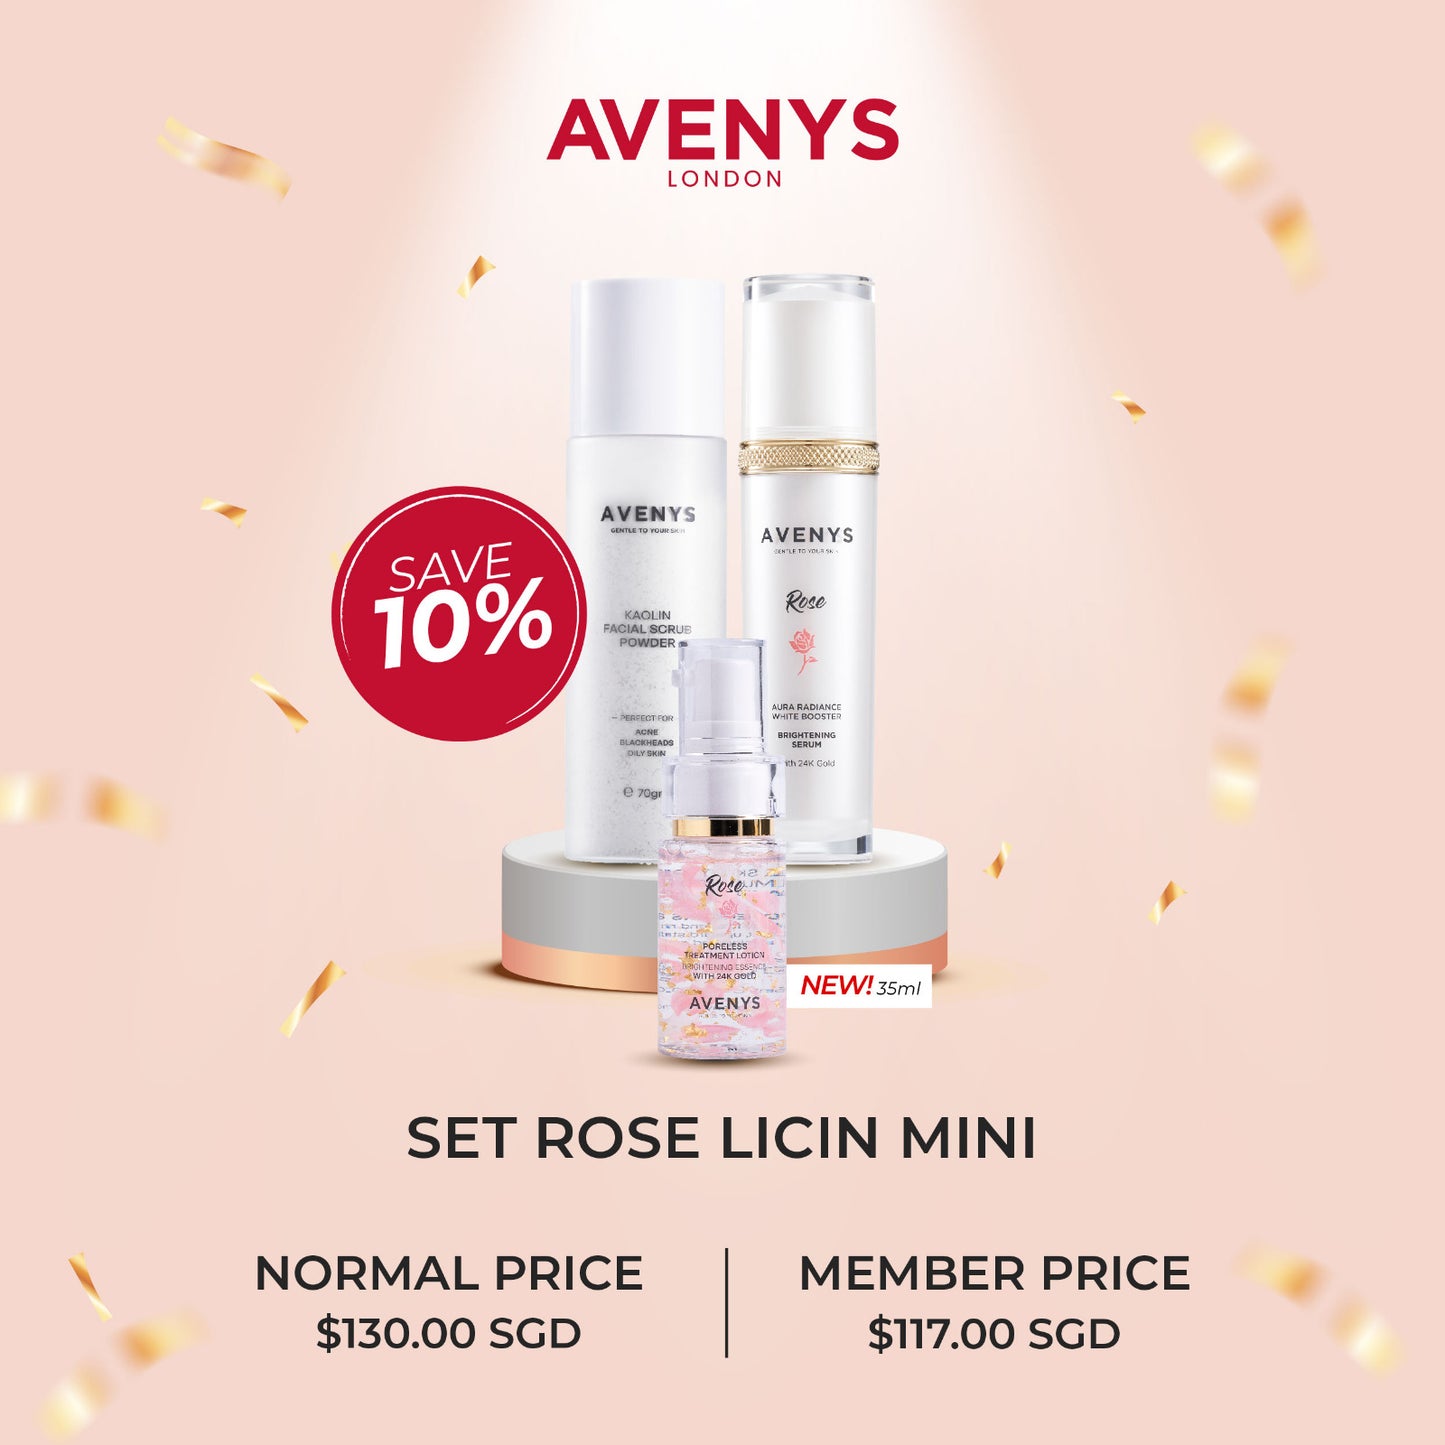 Avenys Promo (For Avenys Members only)